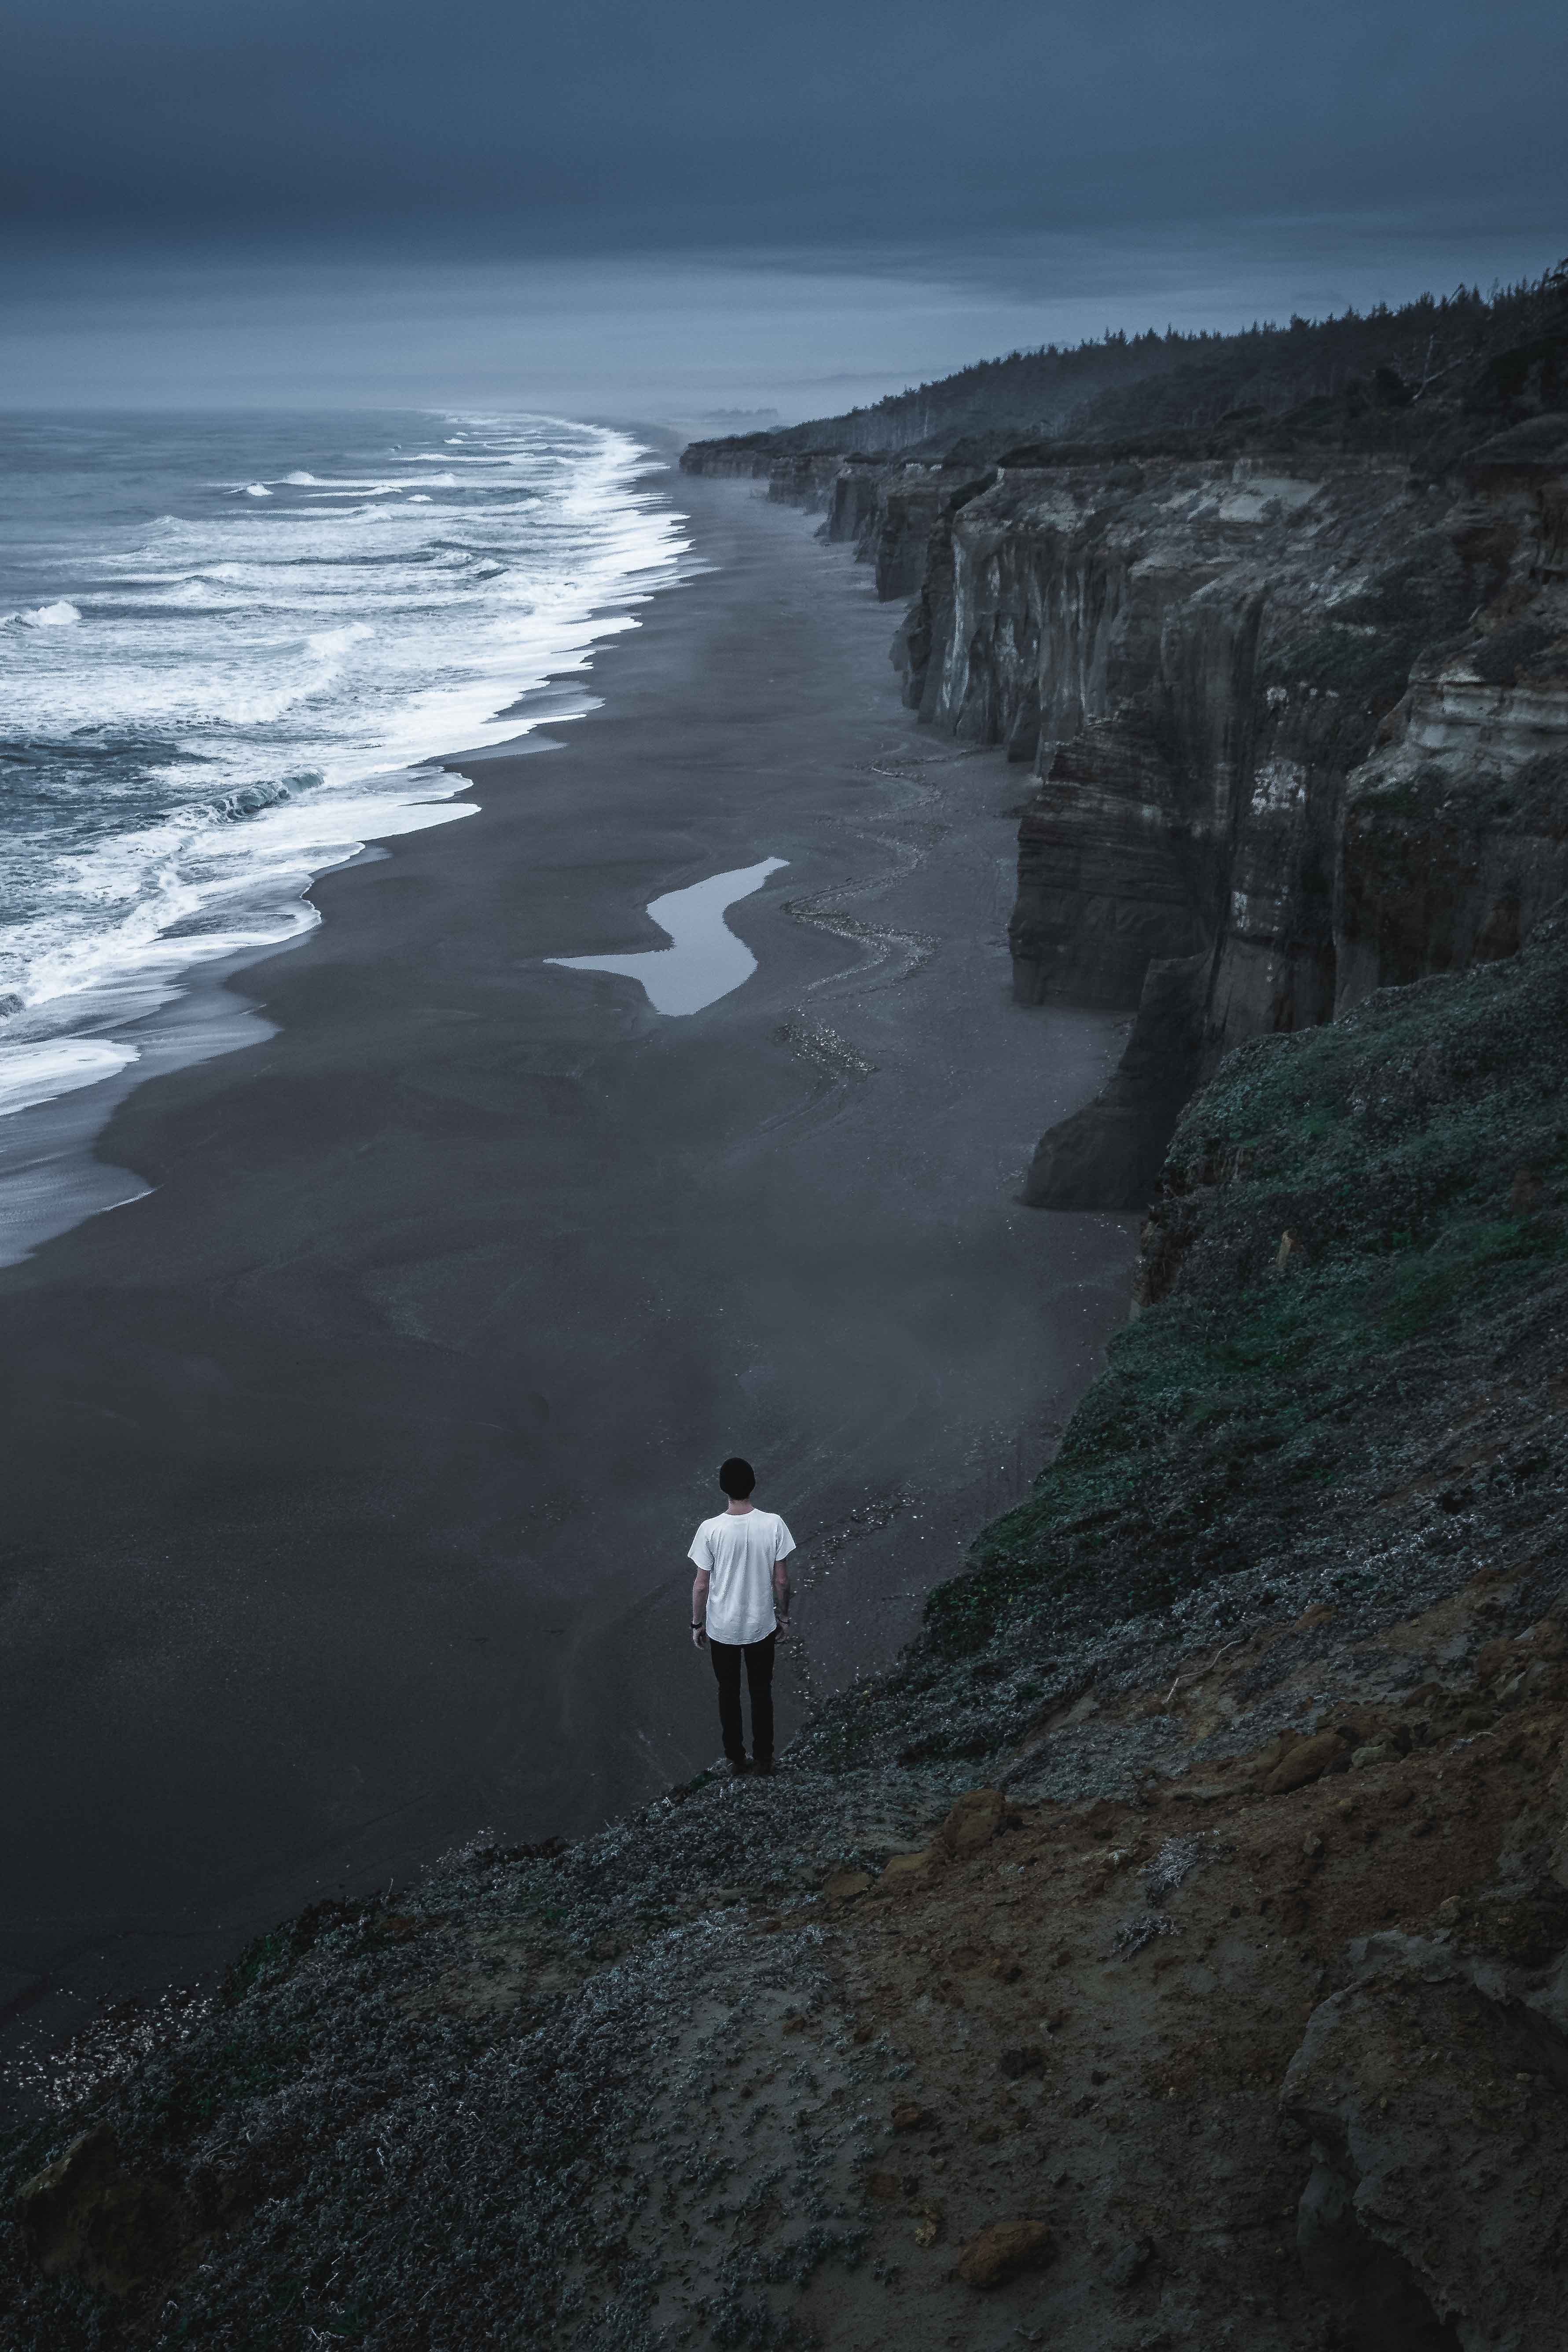 A person wearing a white tshirt looks out at the Southern Oregon coastline